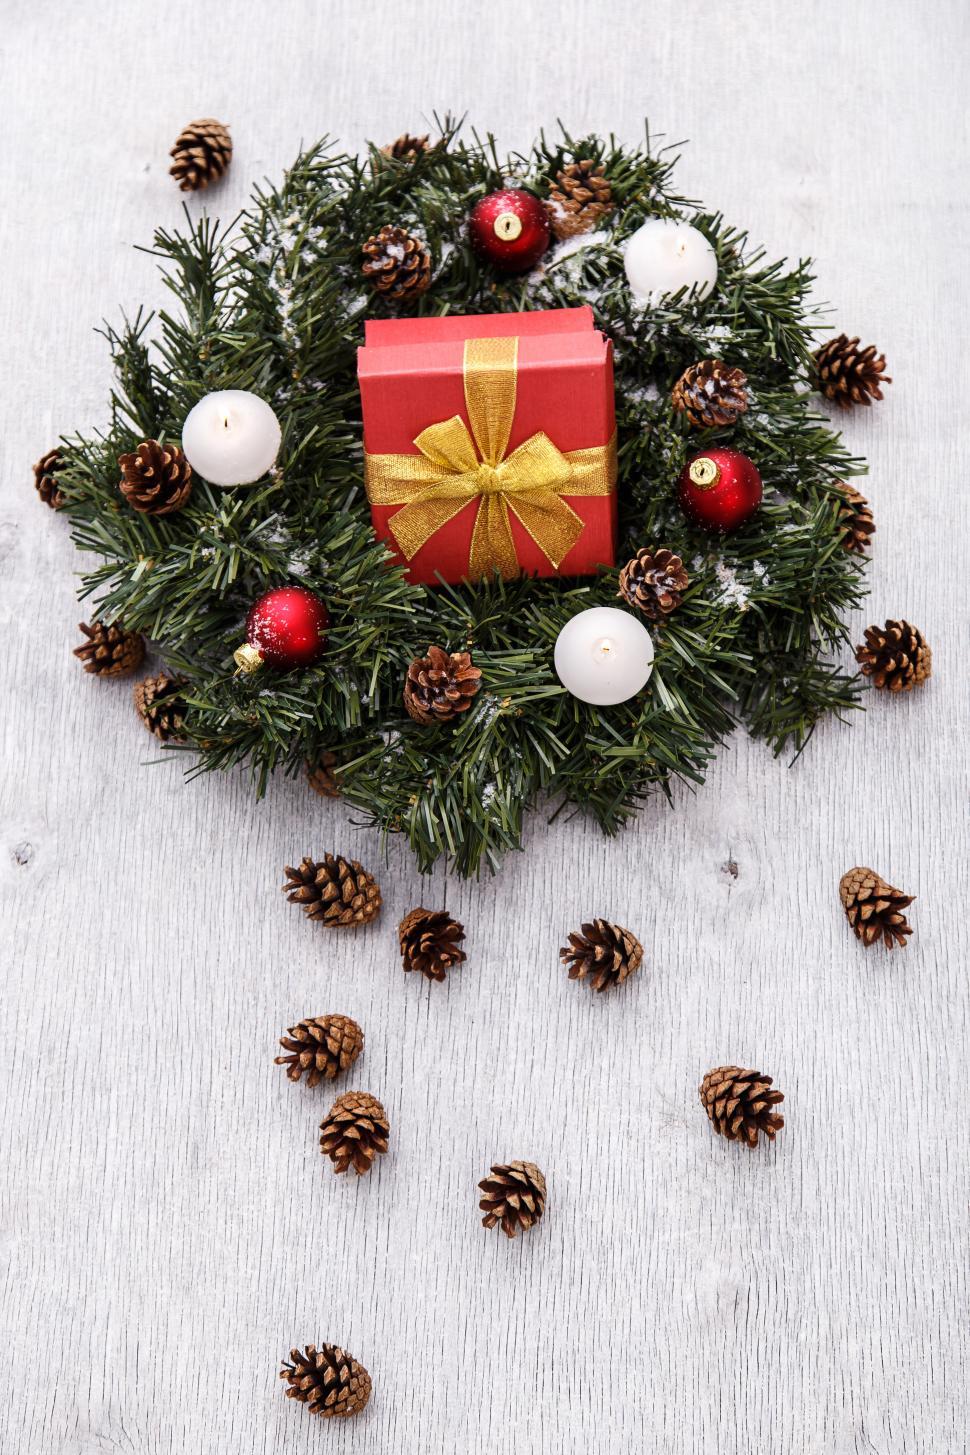 Free Image of Pinecones and fir wreath with wrapped gift 